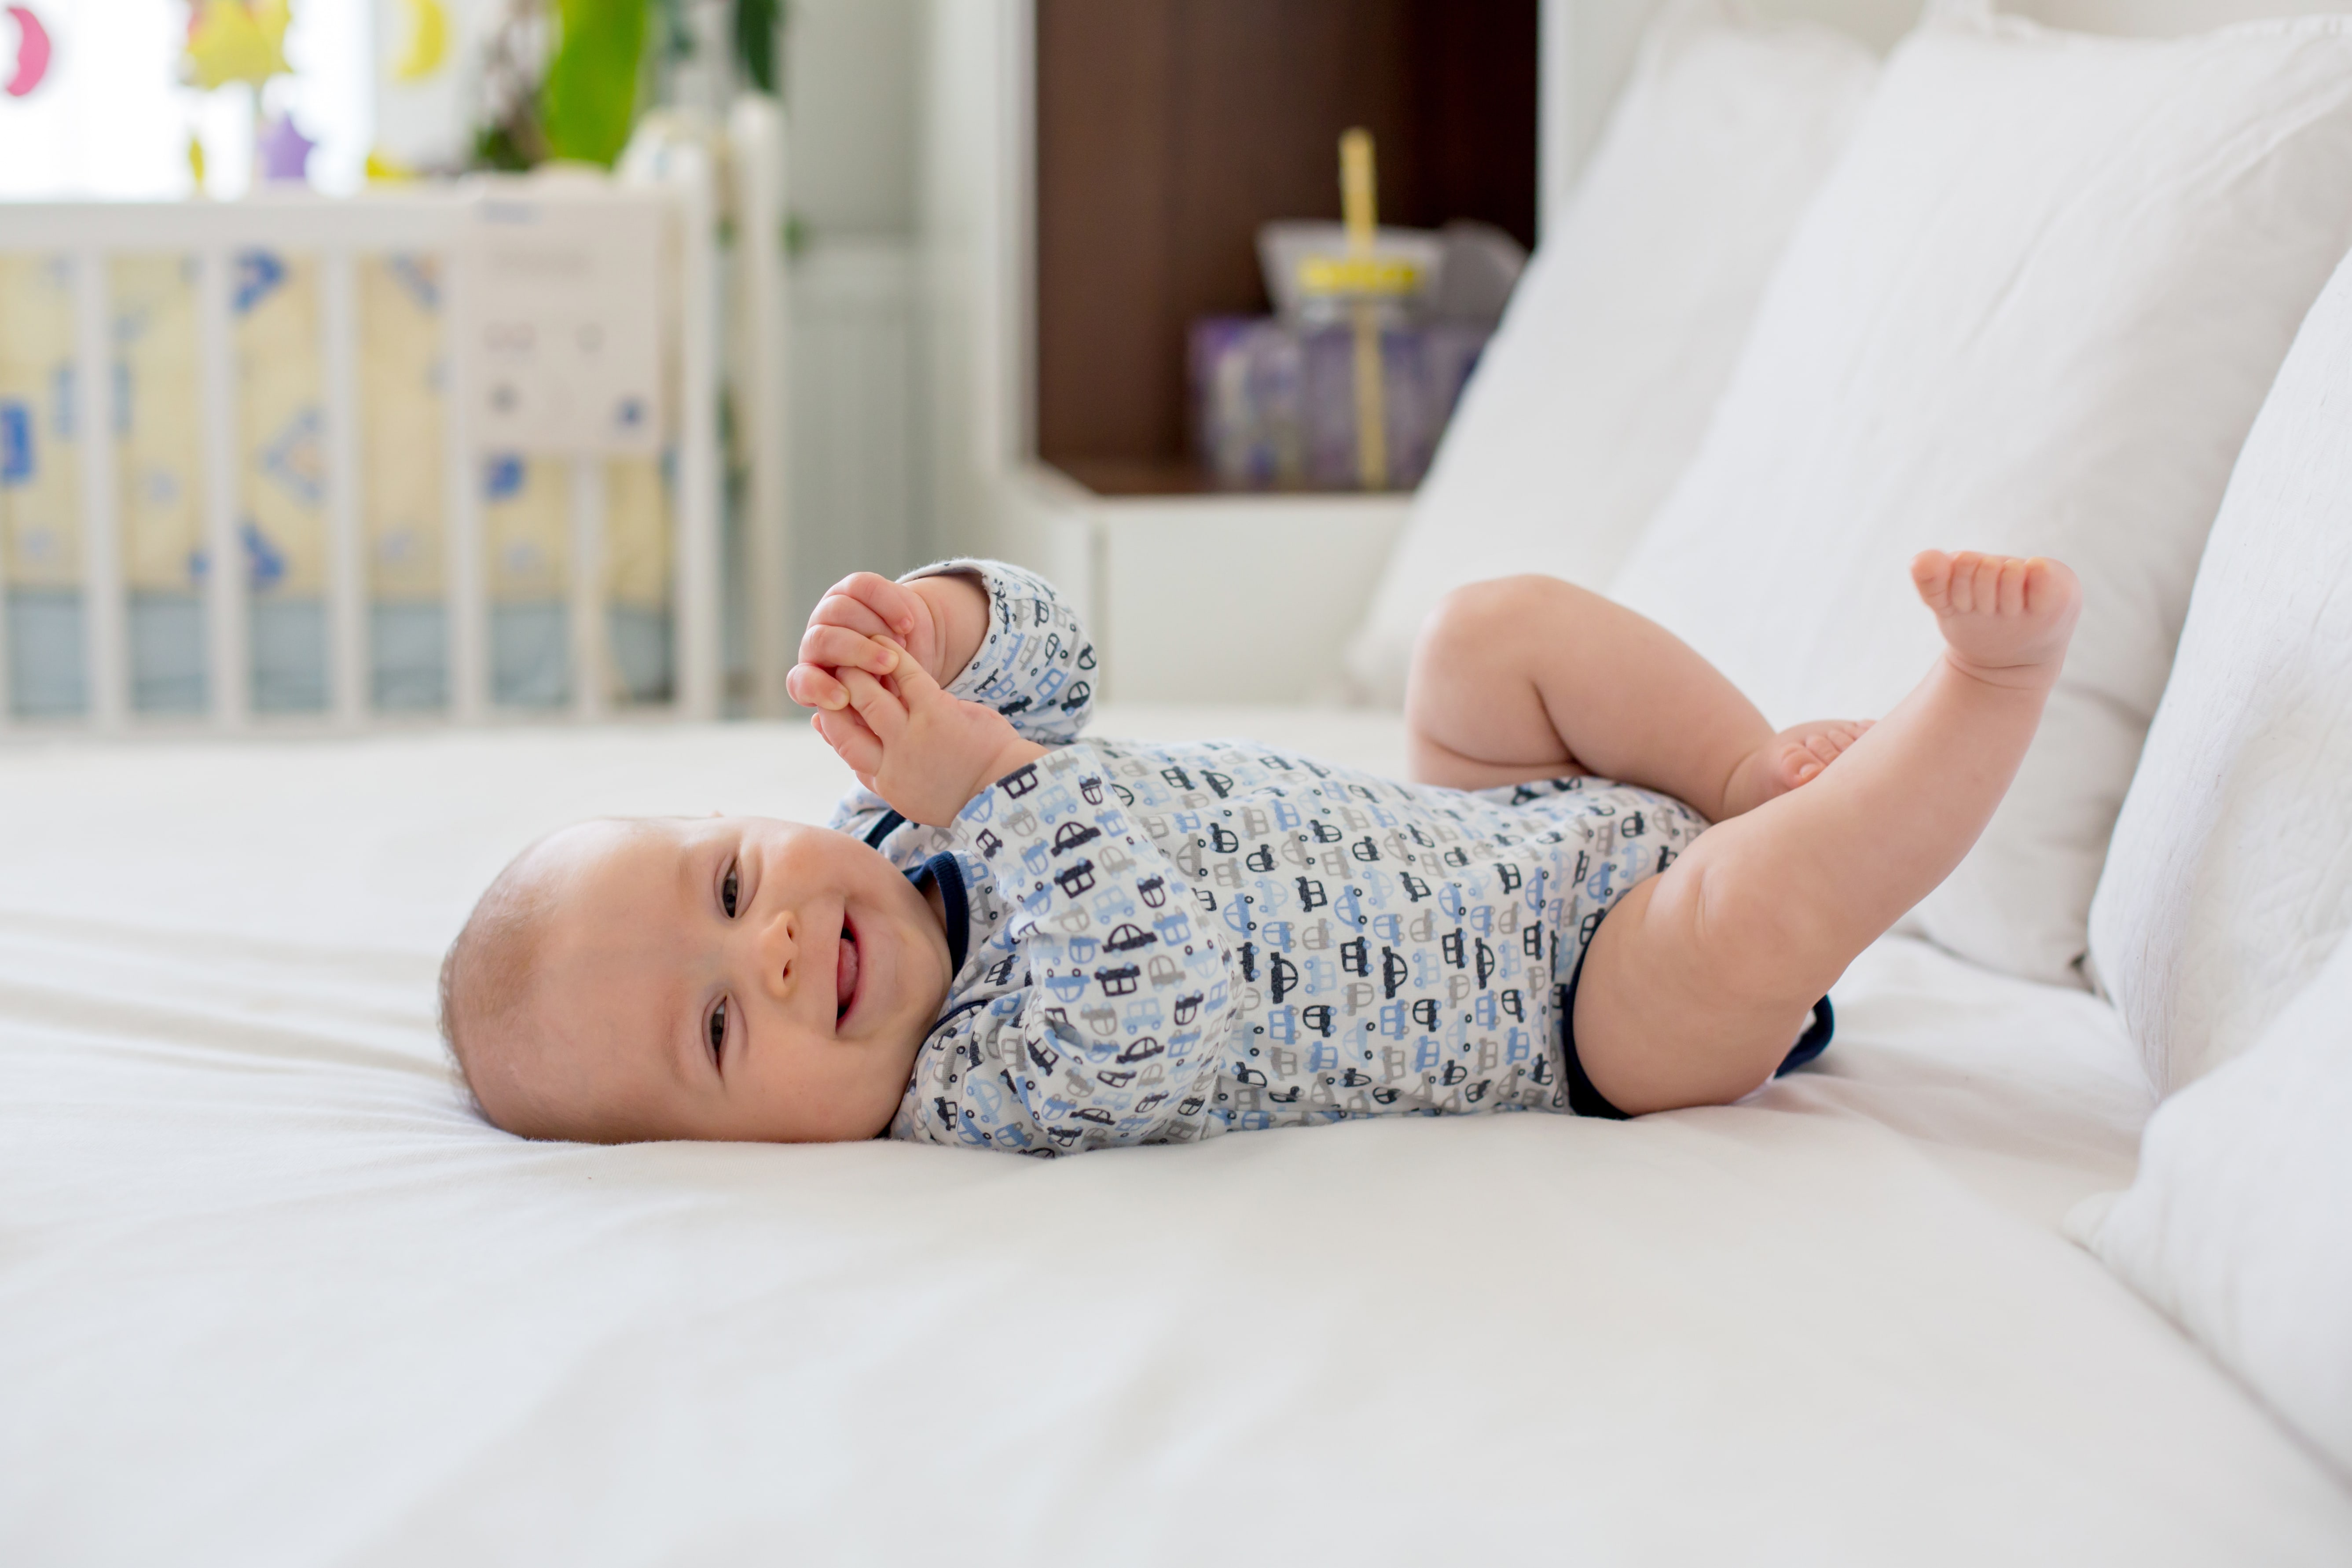 Easing the symptoms of colic in babies